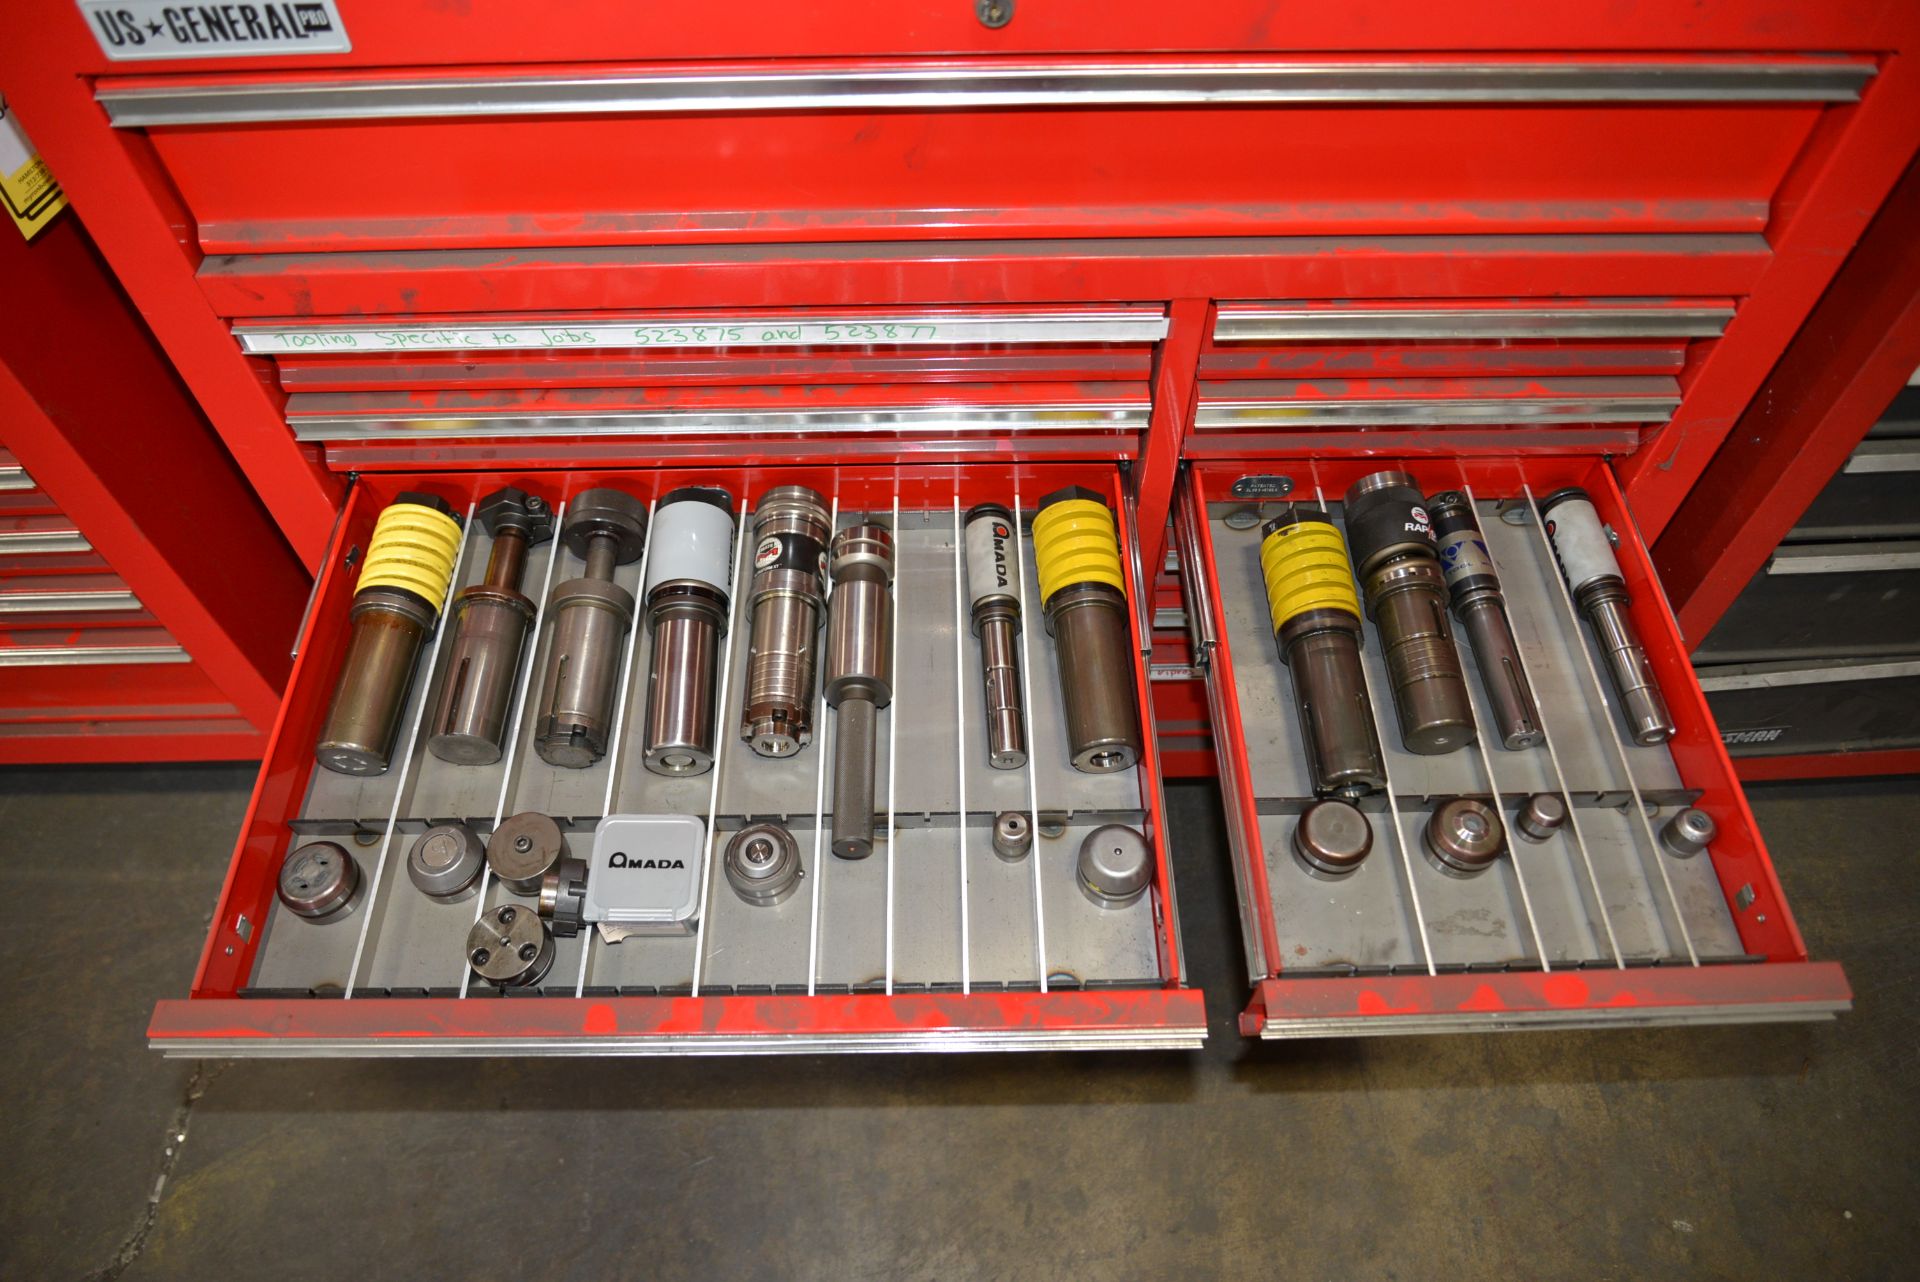 US GENERAL TOOL CHEST FULL OF AMADA TOOLING - Image 5 of 8